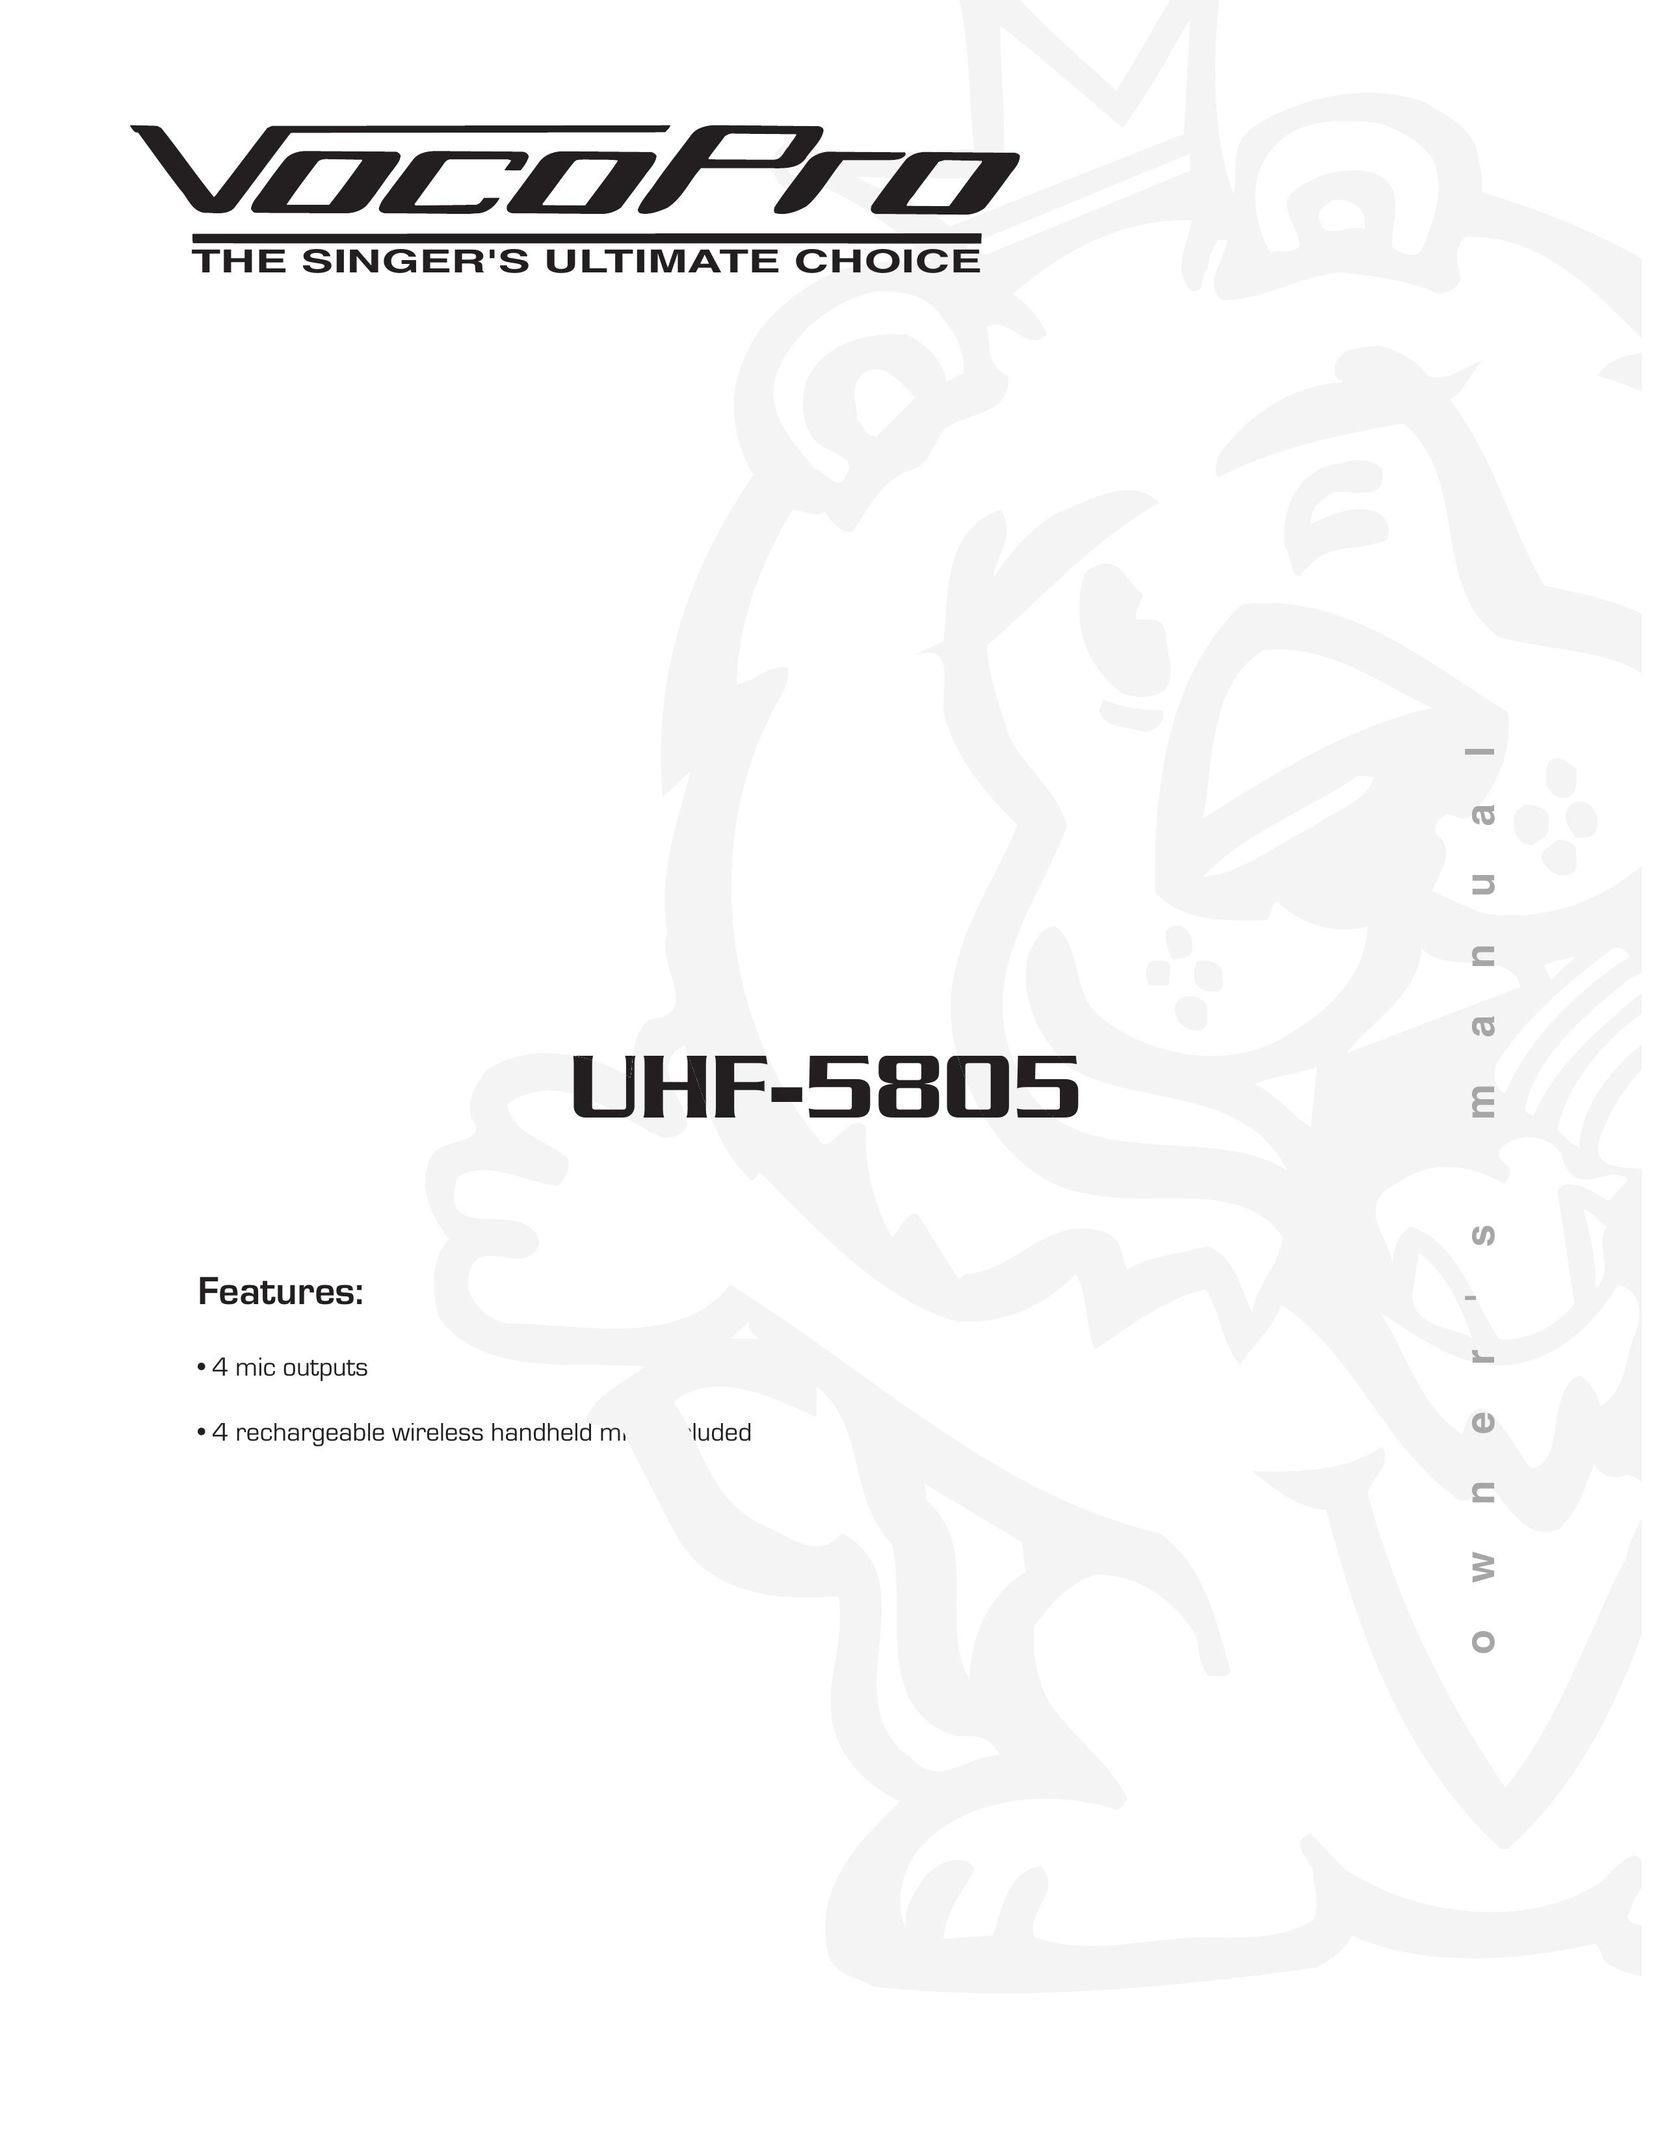 VocoPro UHF-5805 Stereo Amplifier User Manual